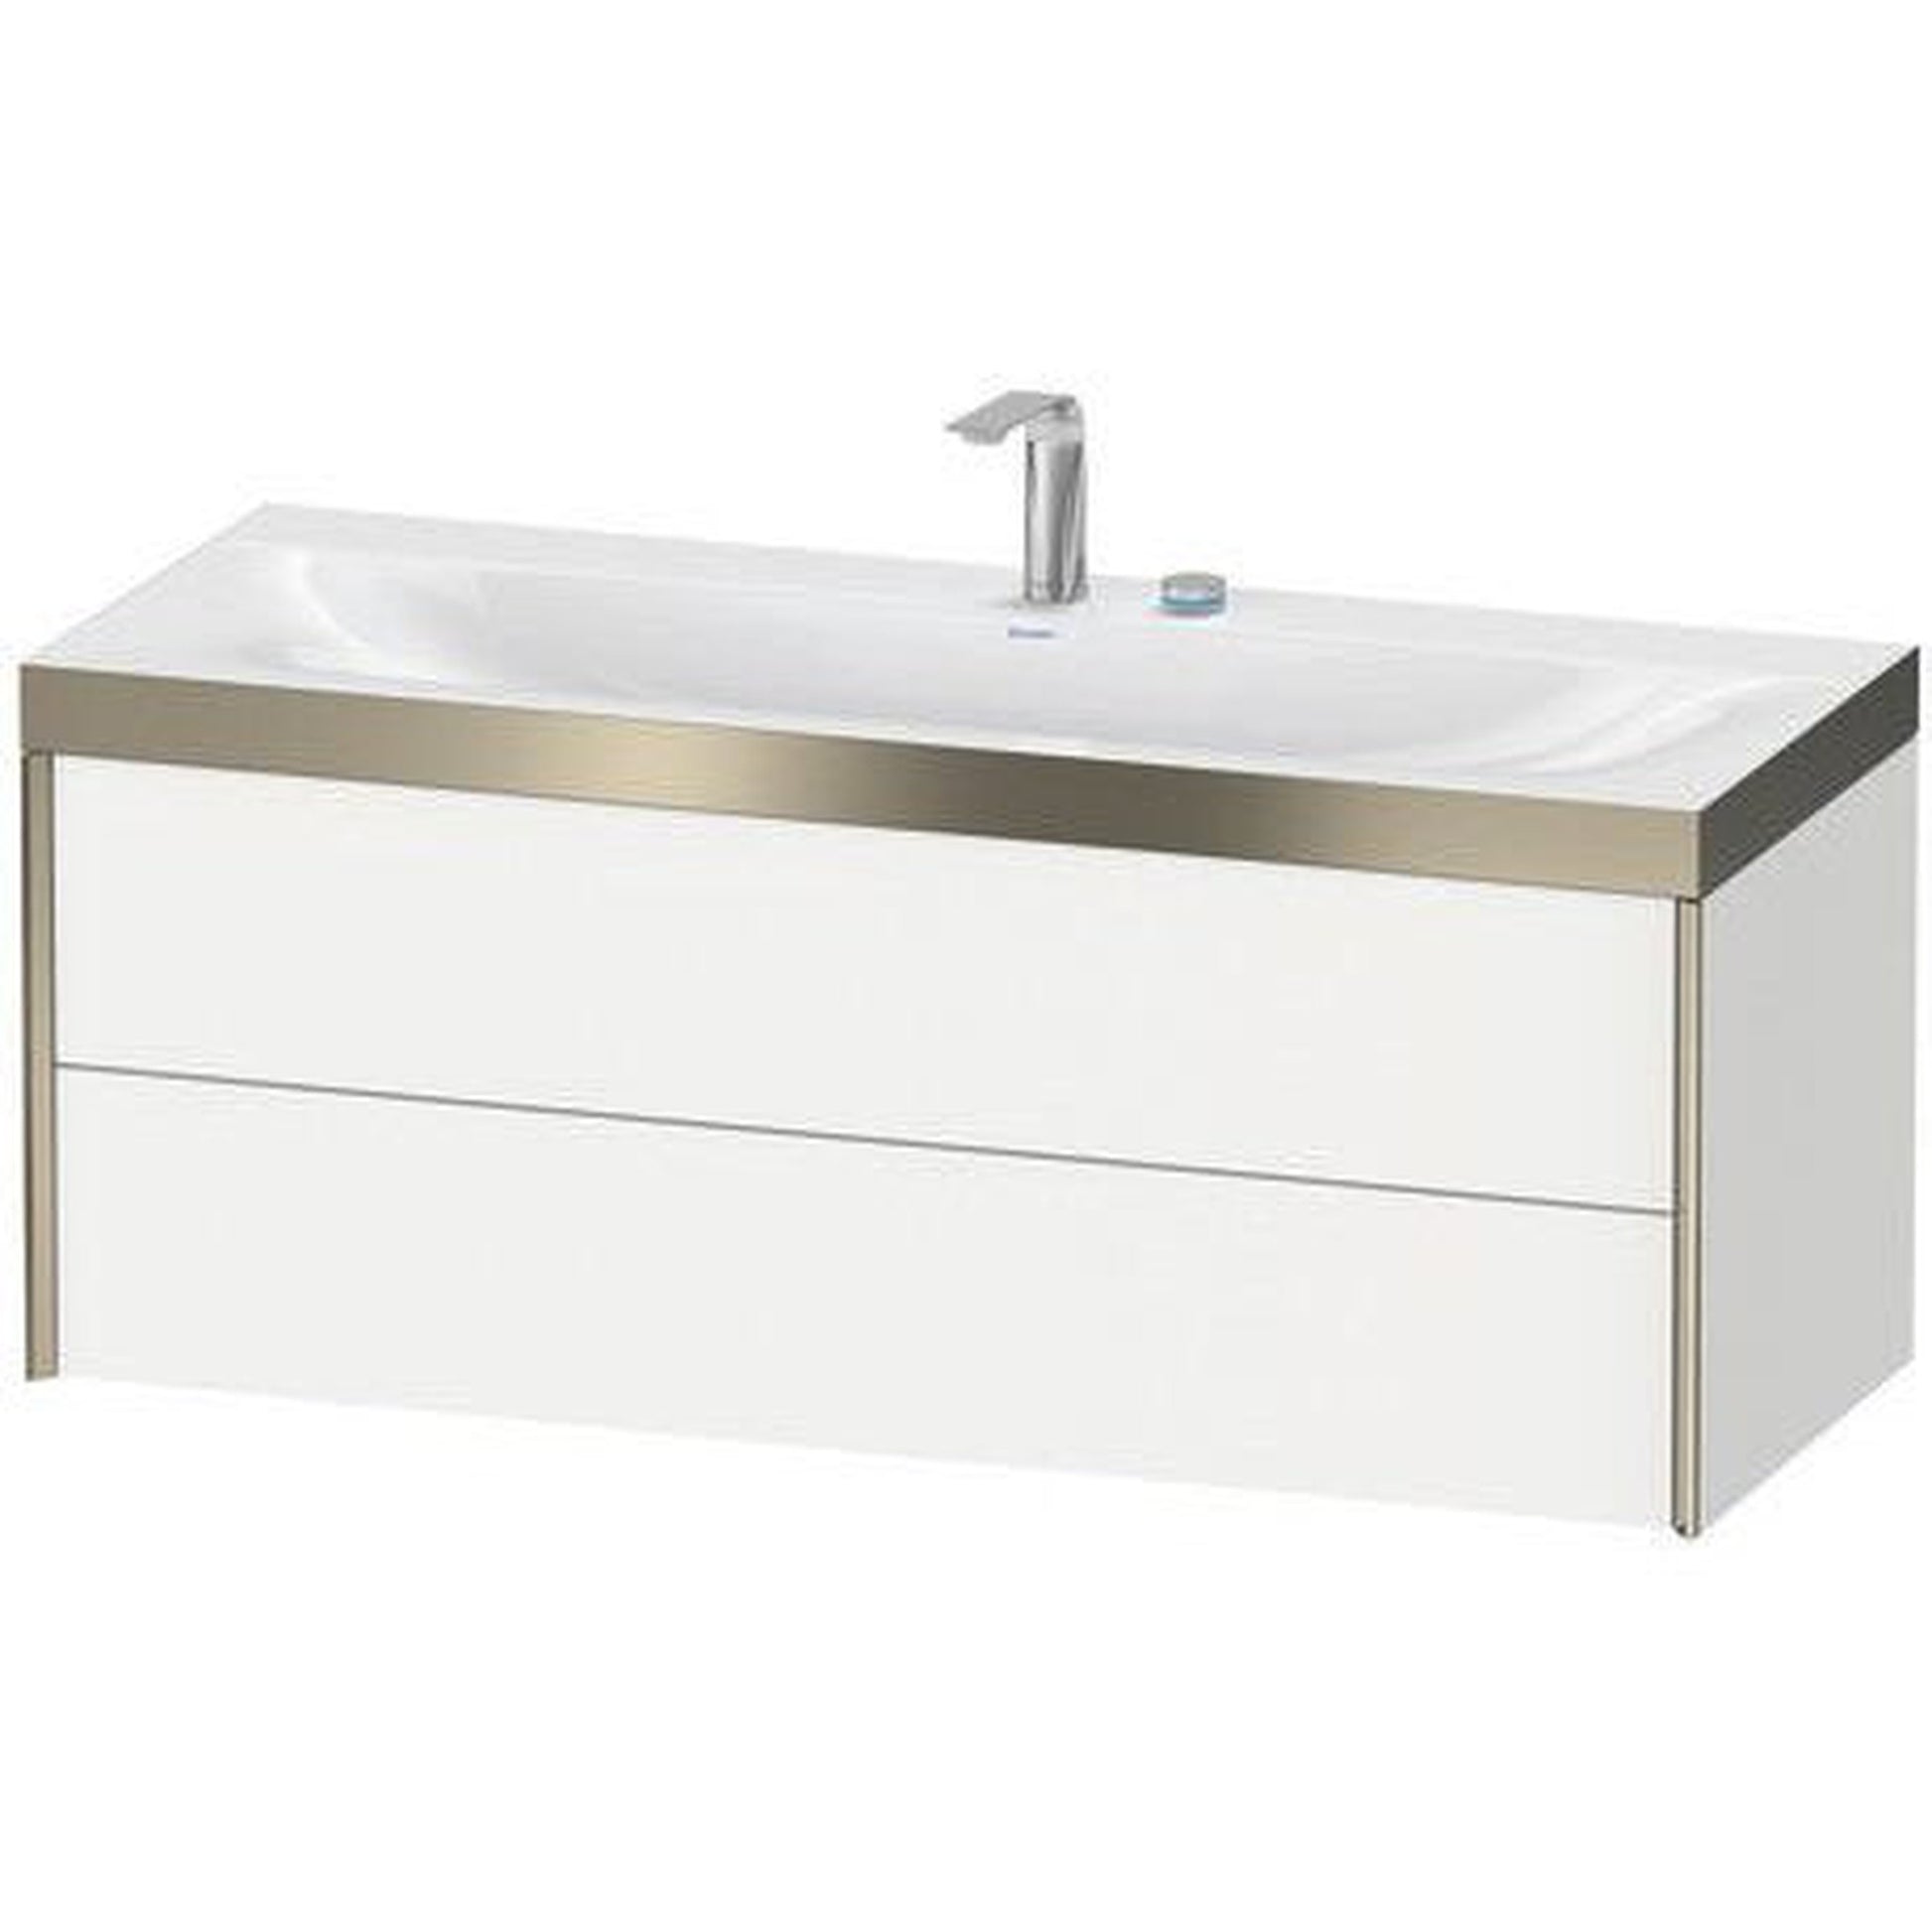 Duravit Xviu 47" x 20" x 19" Two Drawer C-Bonded Wall-Mount Vanity Kit With One Tap Hole, White (XV4617OB185C)